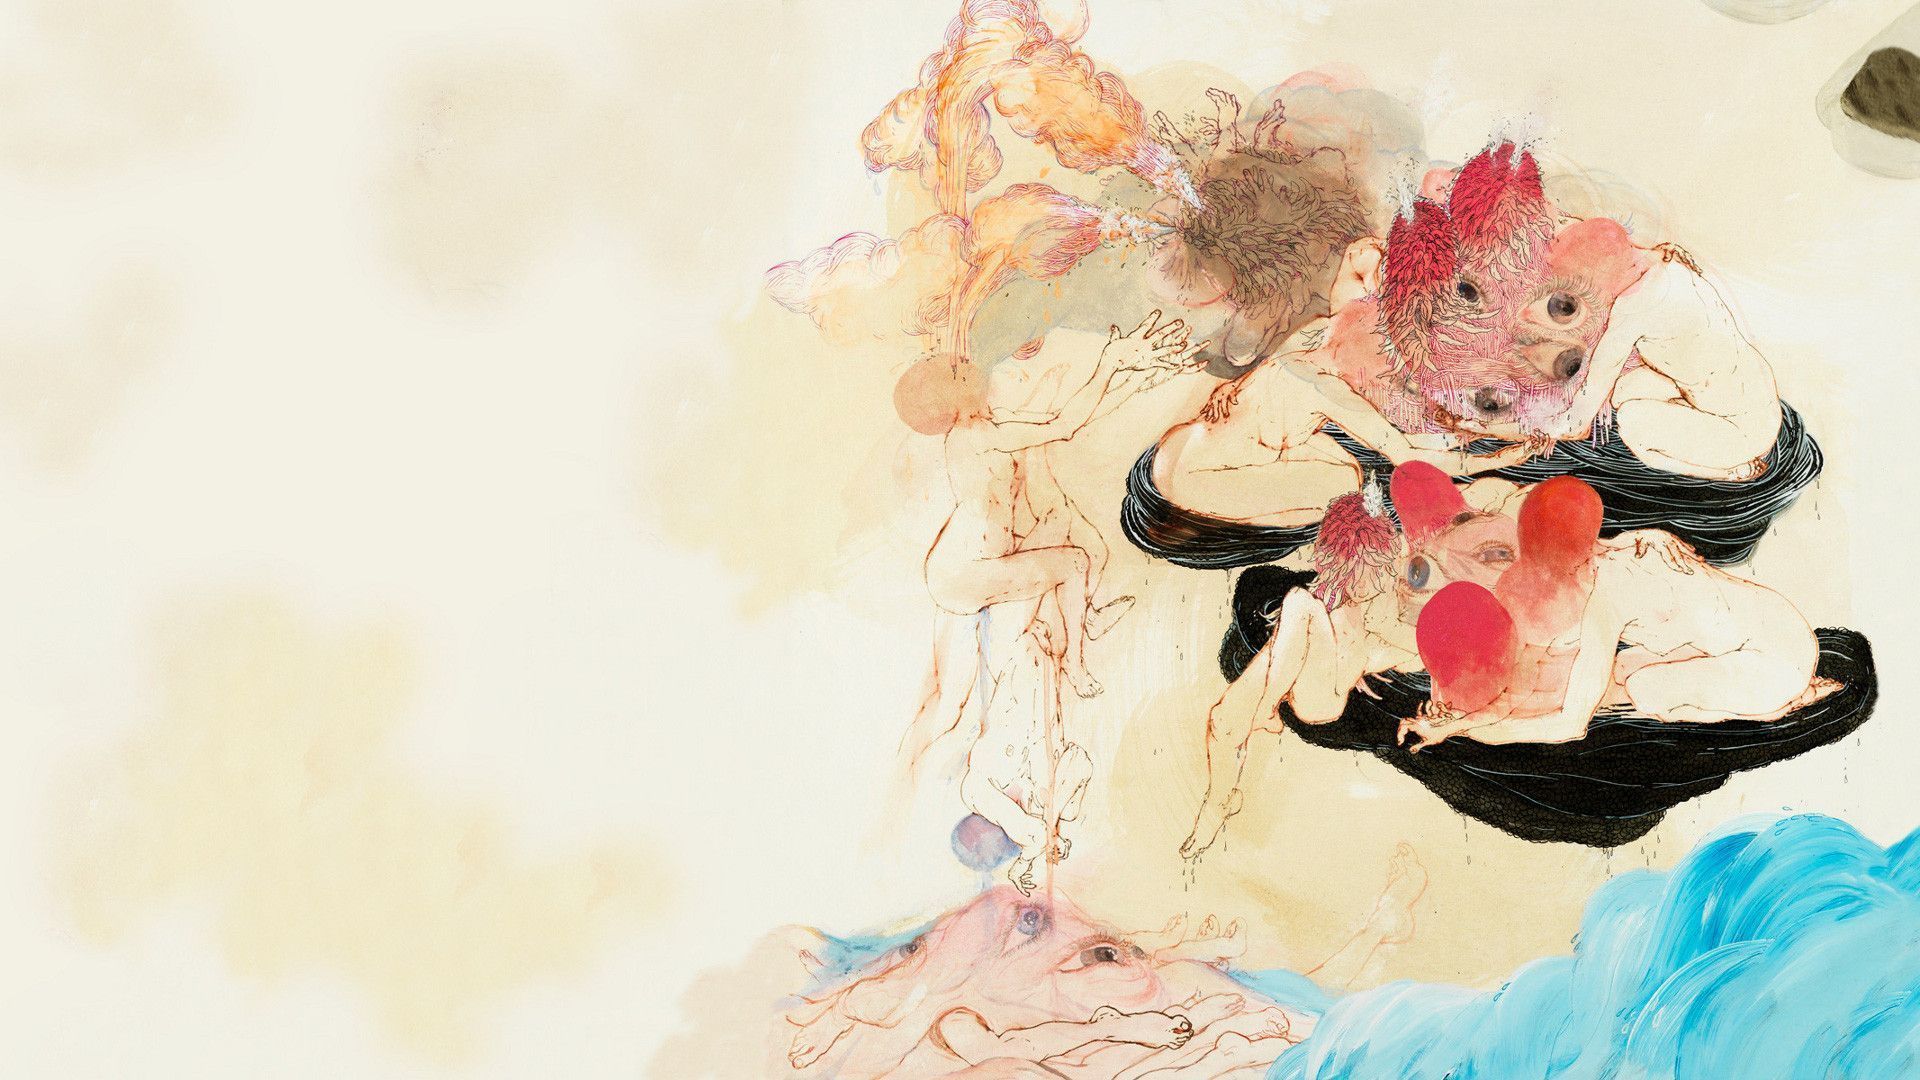 Nujabes Wallpapers